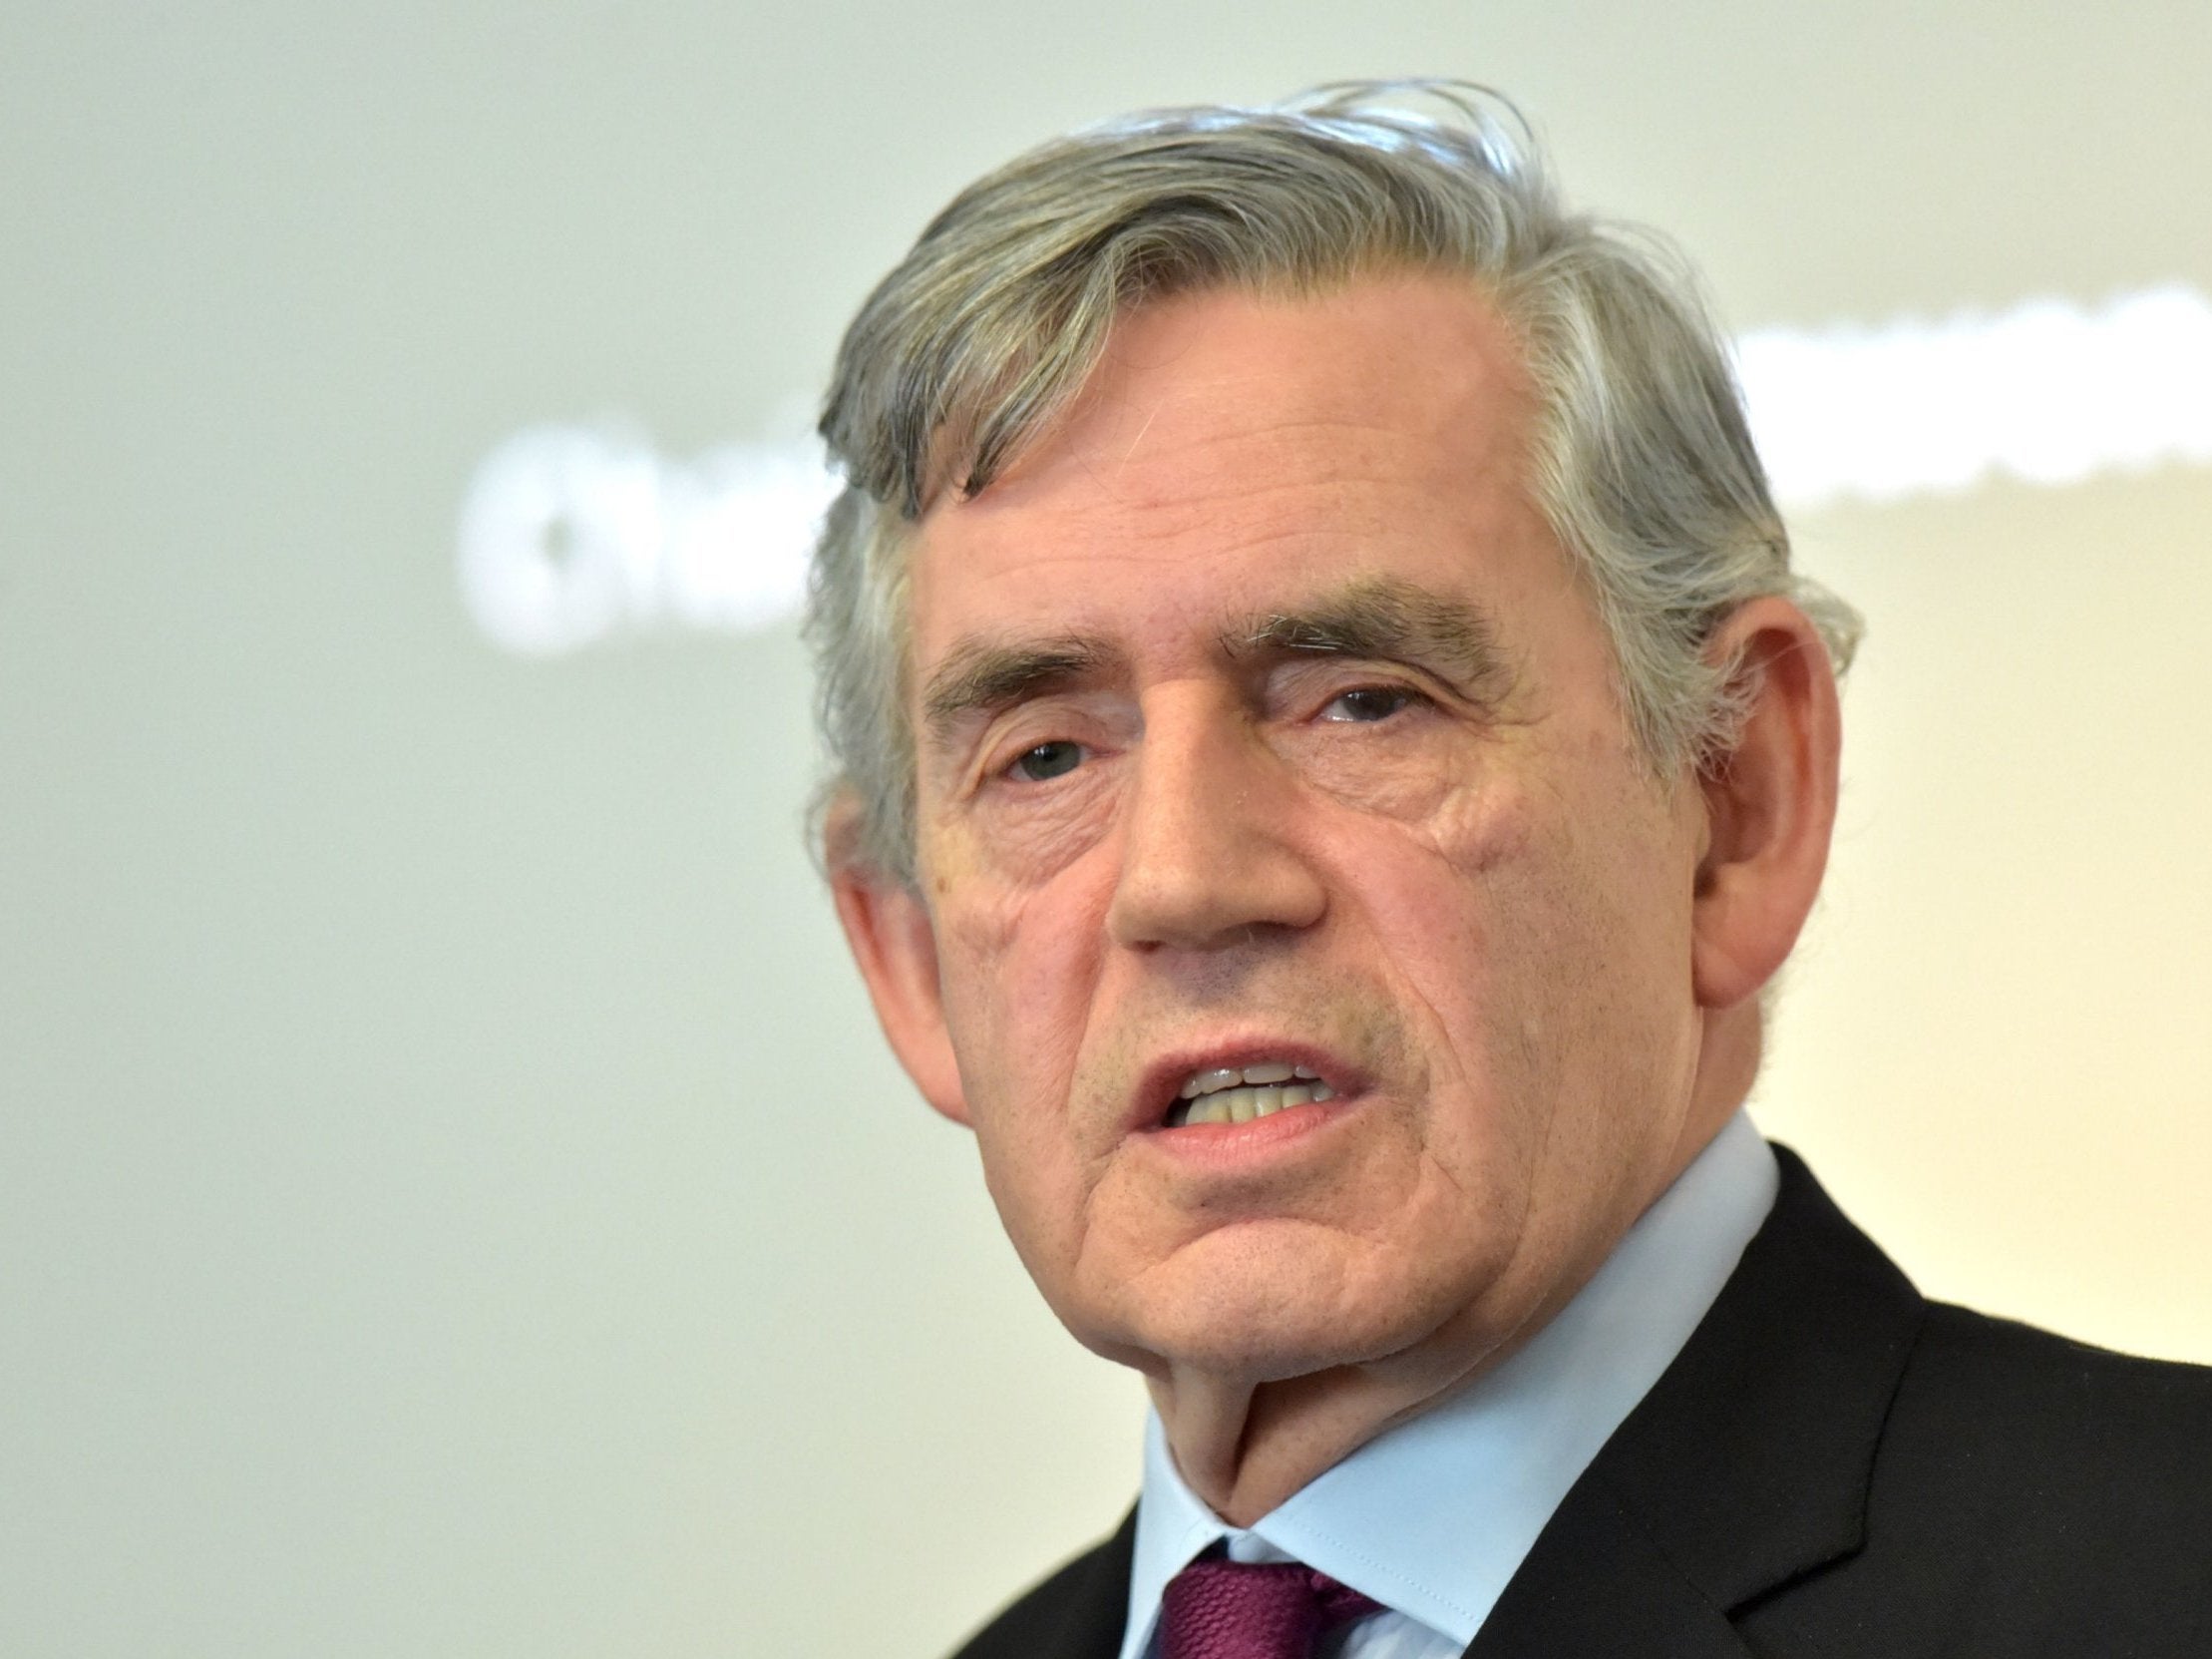 Gordon Brown: ‘To the Jewish community, we promised ‘never again’....we have not lived up to that promise’